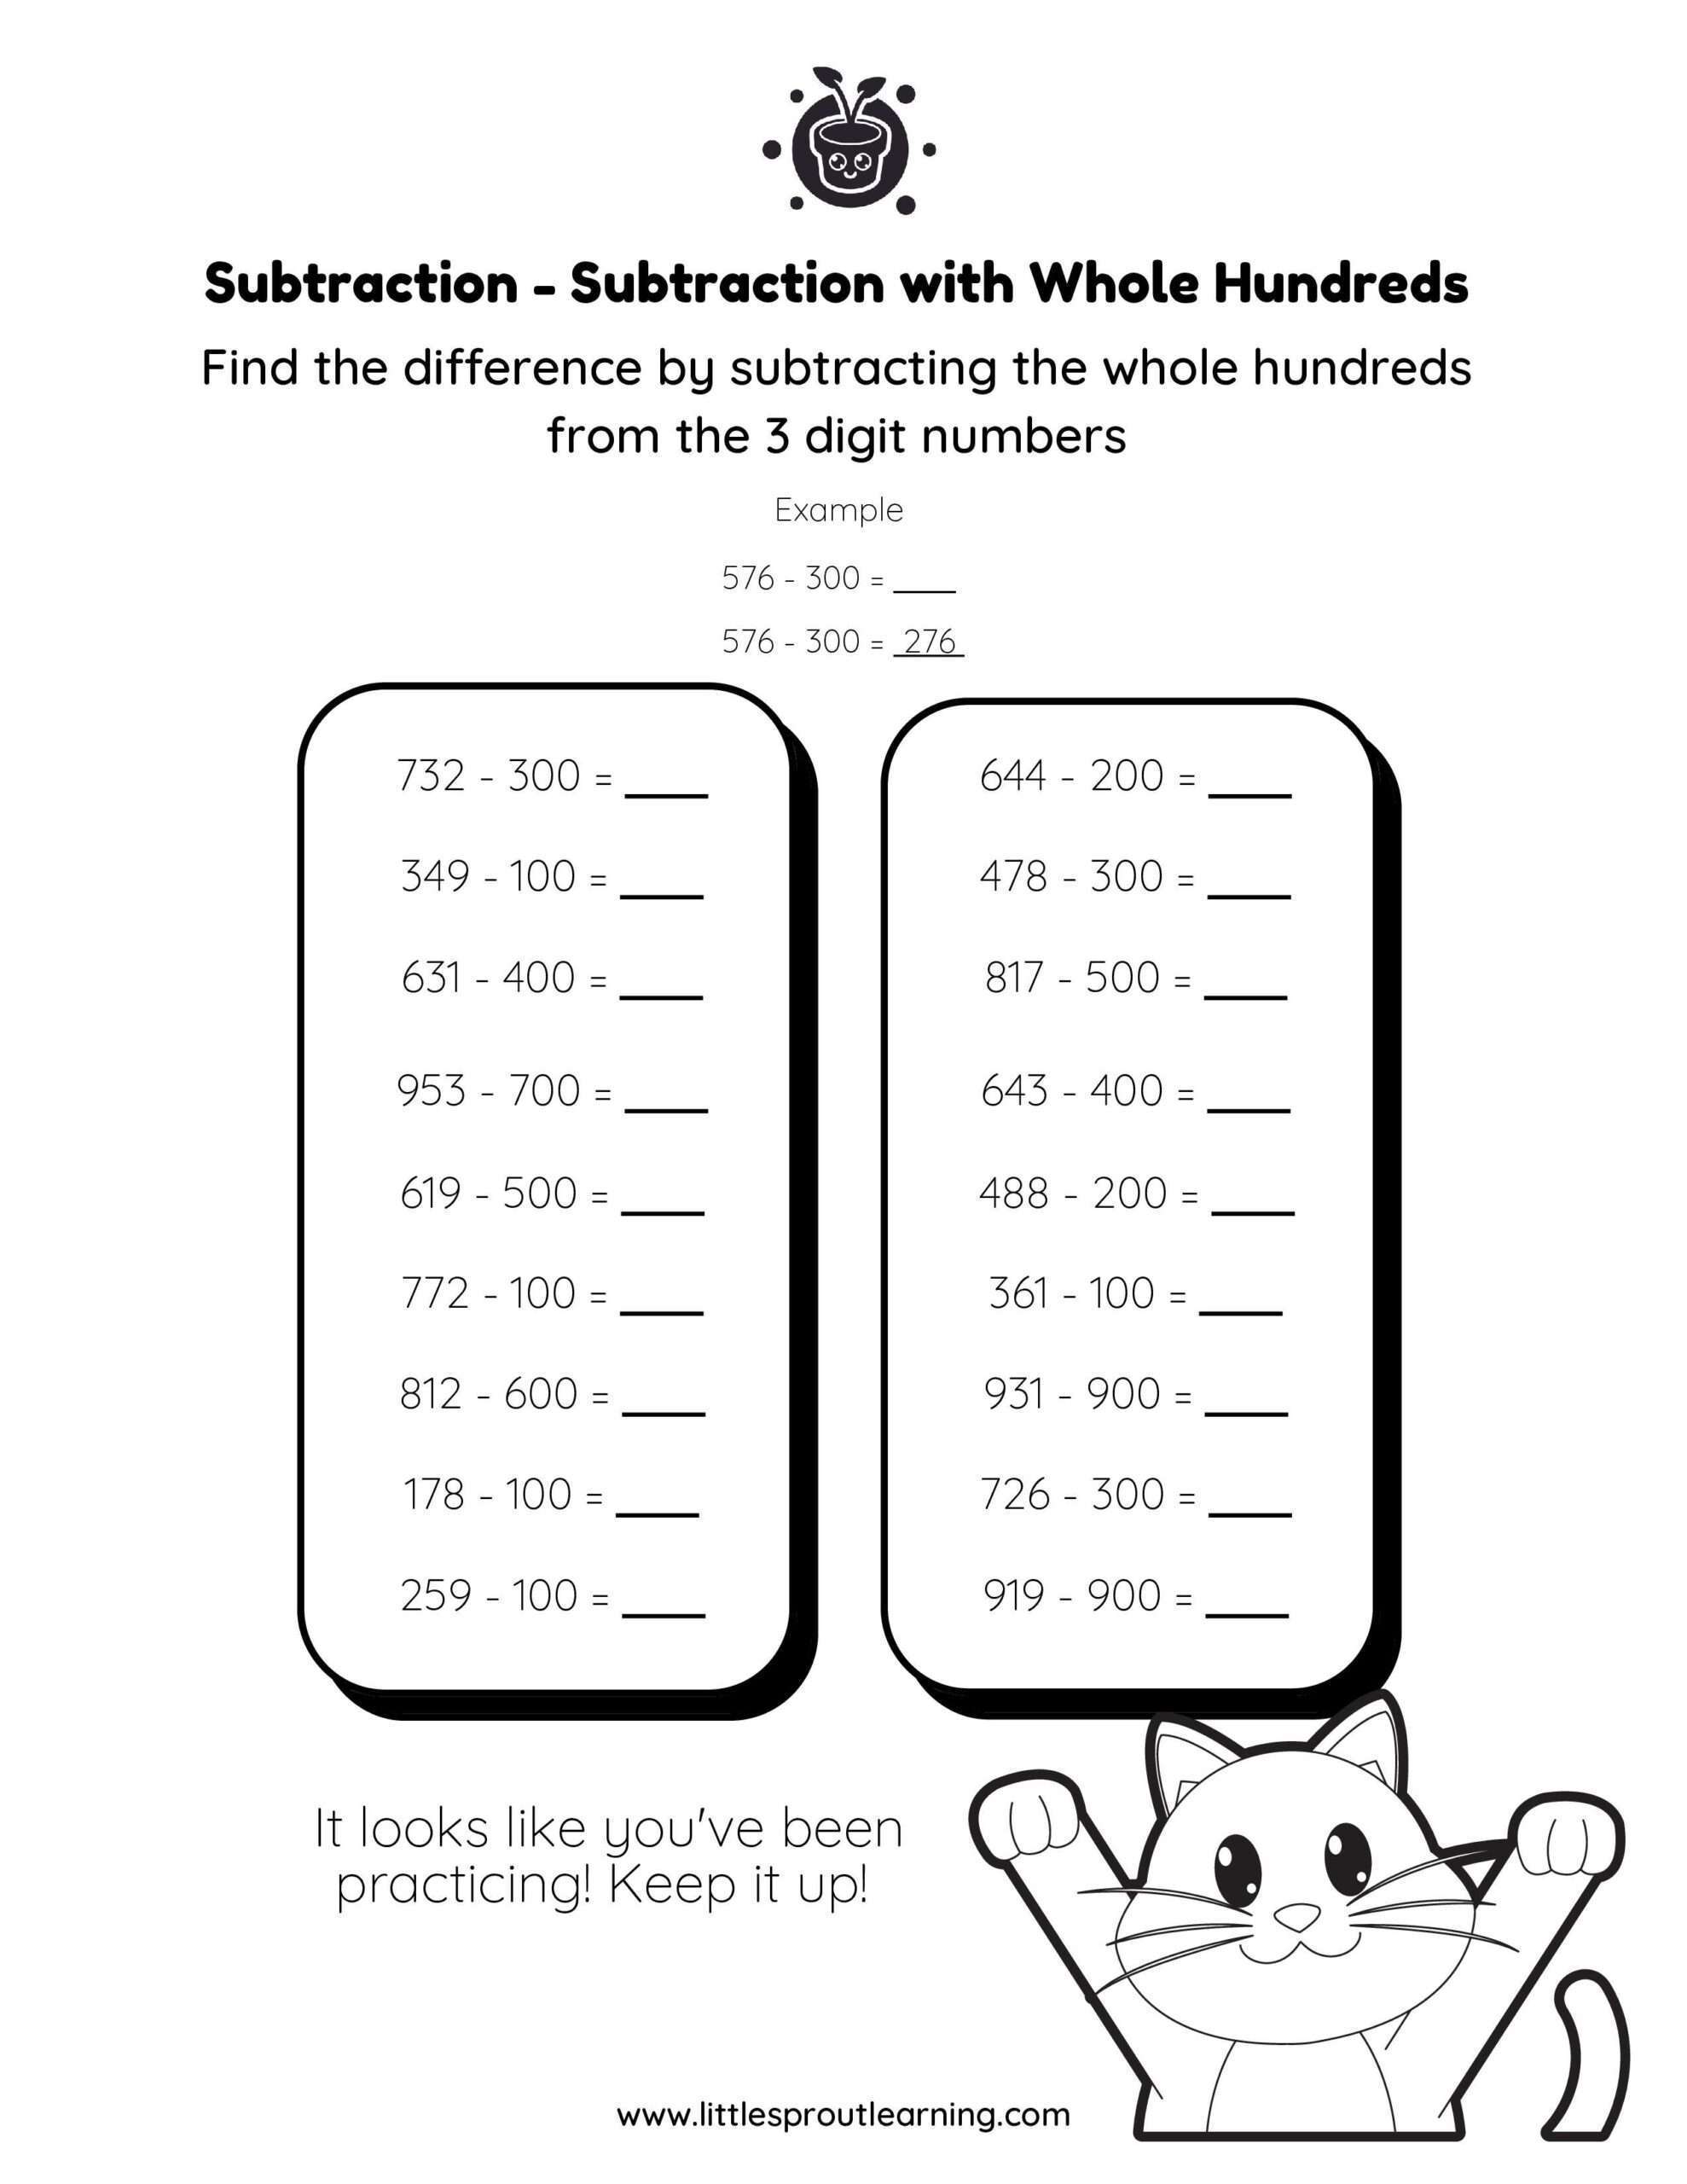 Subtraction with Whole hundreds from 3 Digit Numbers